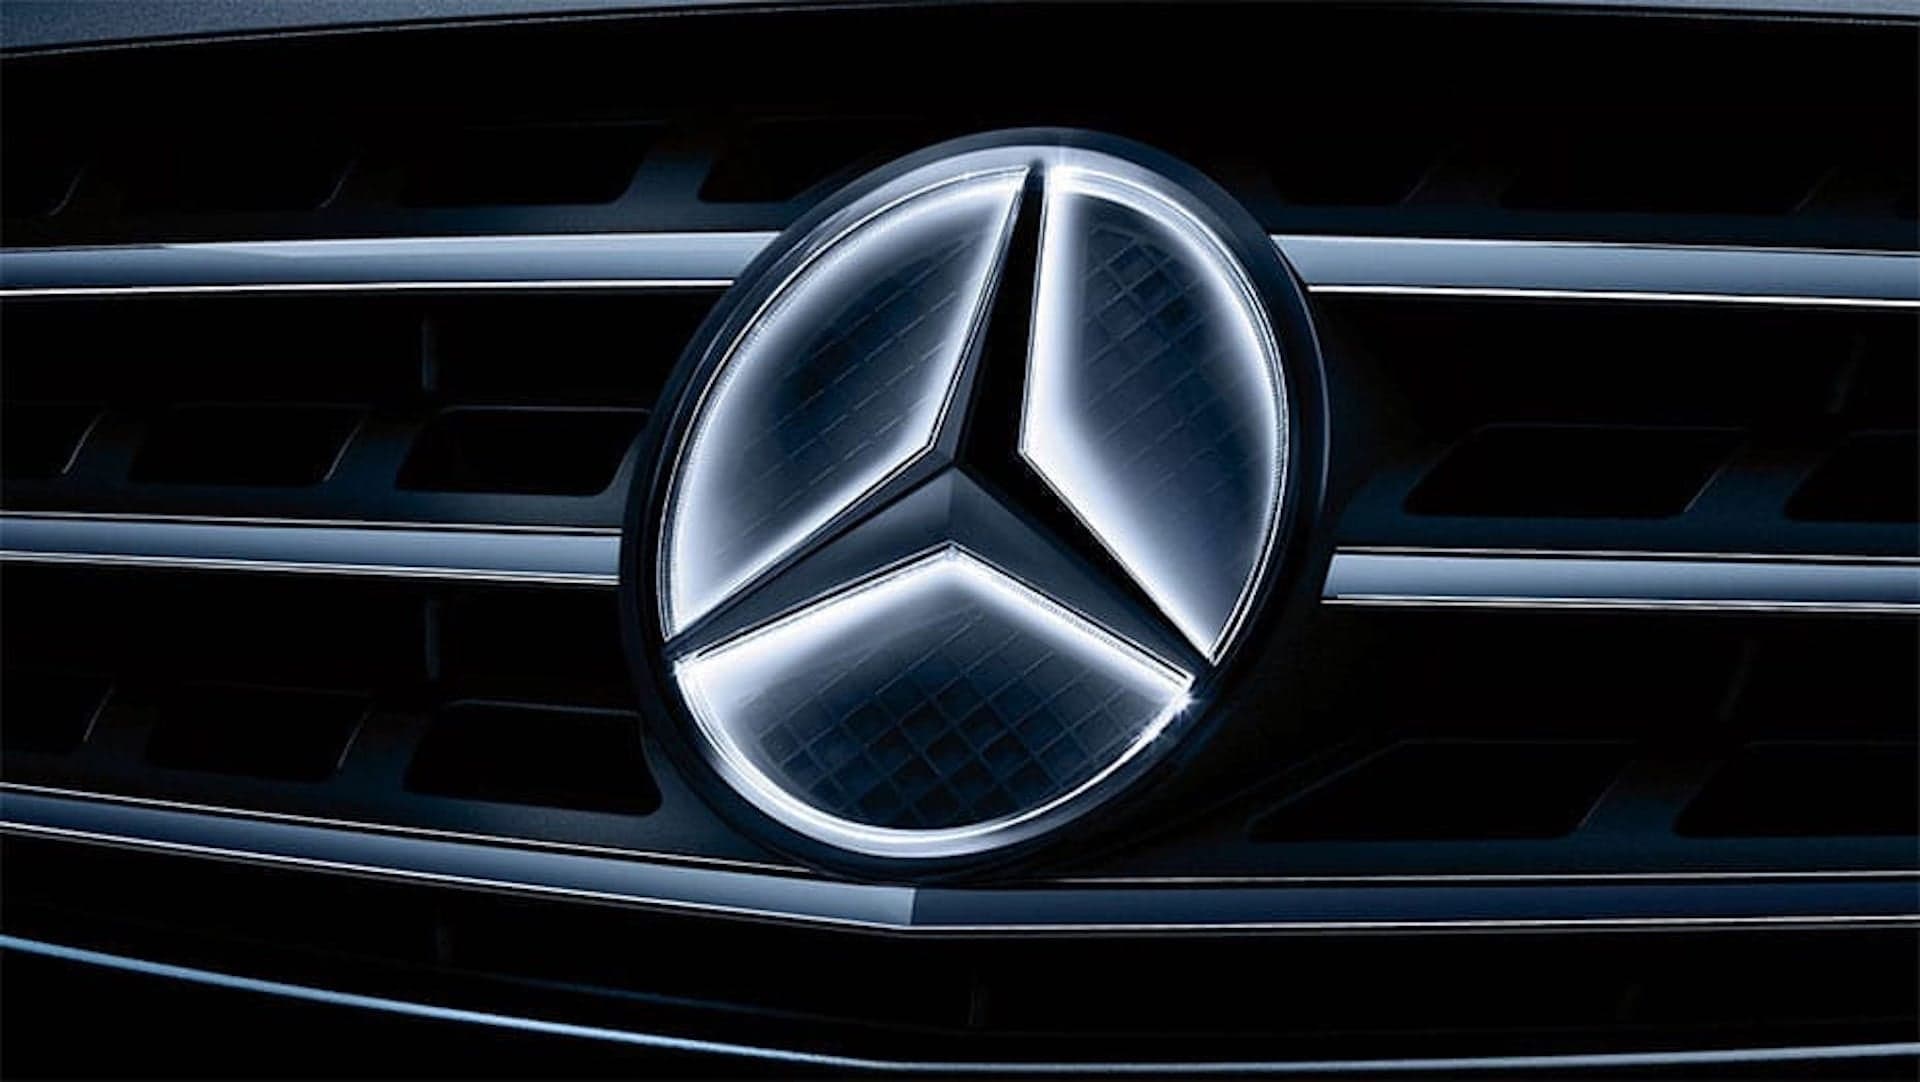 Recall: Mercedes-Benz’s Illuminated Badge Can Cause Power Steering Failure